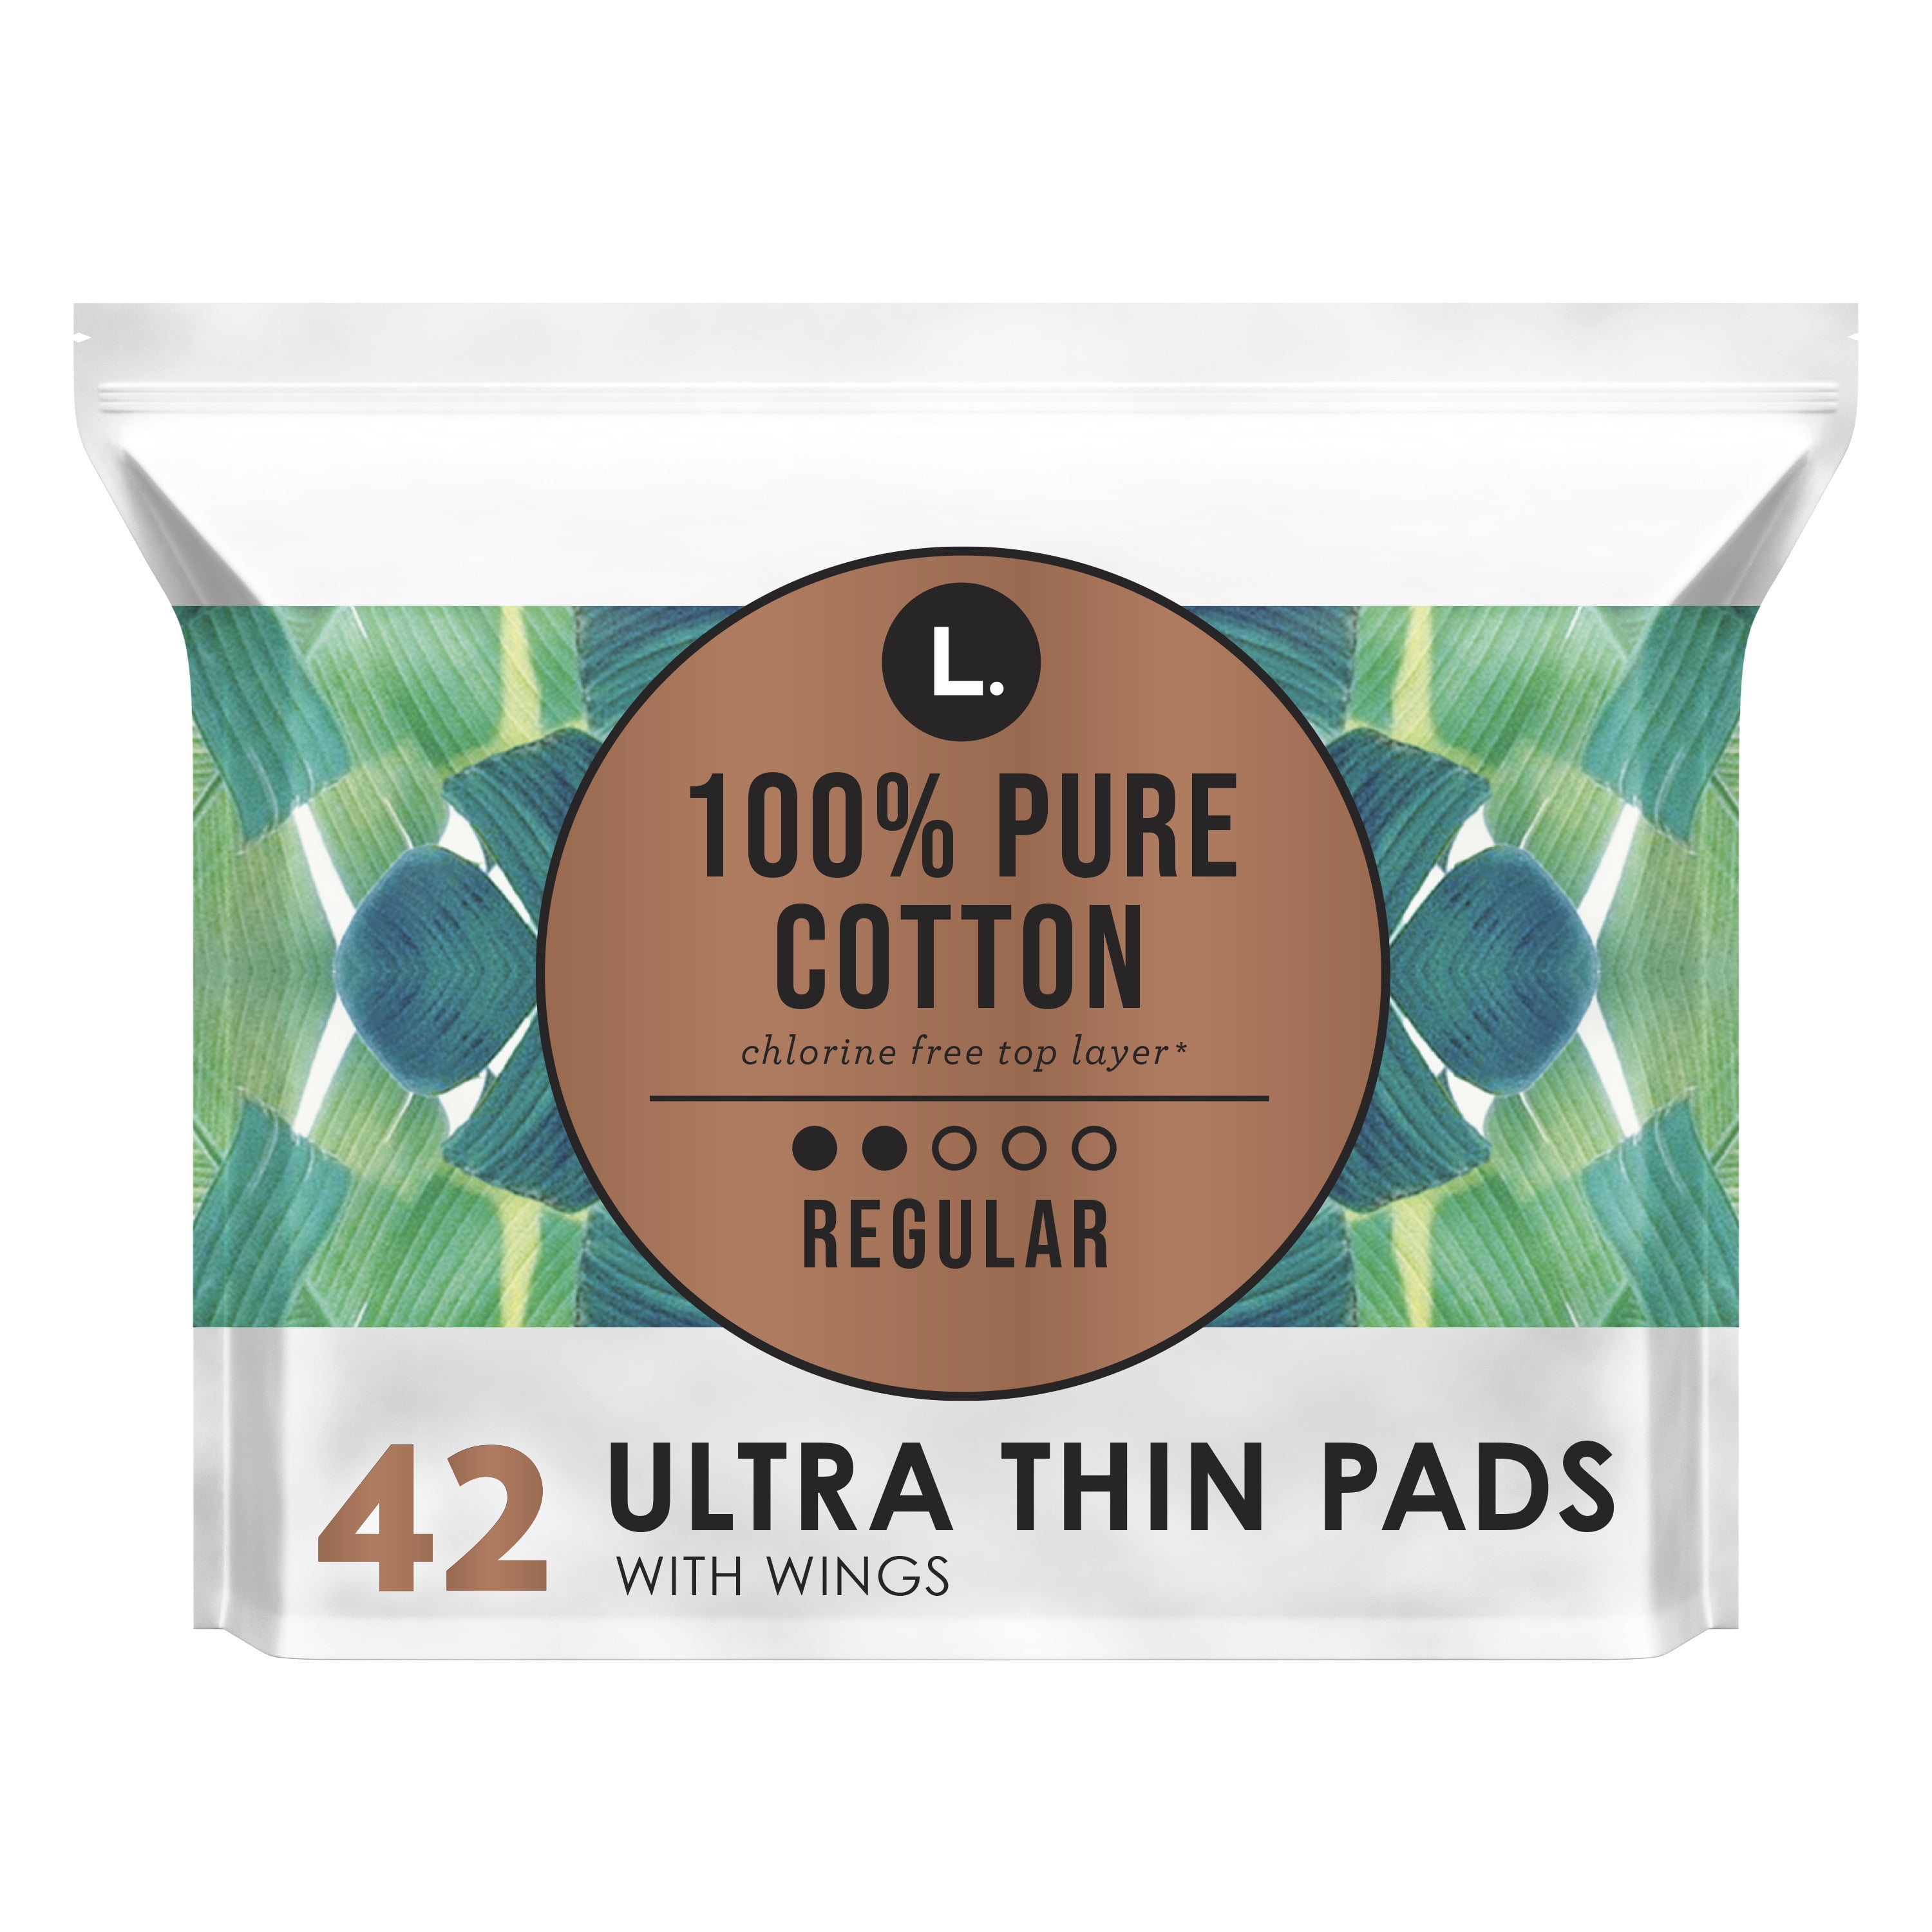 L. Ultra Thin Pads, 100% Cotton Free Top Layer, with Wings, Regular Absorbency, 42 Ct